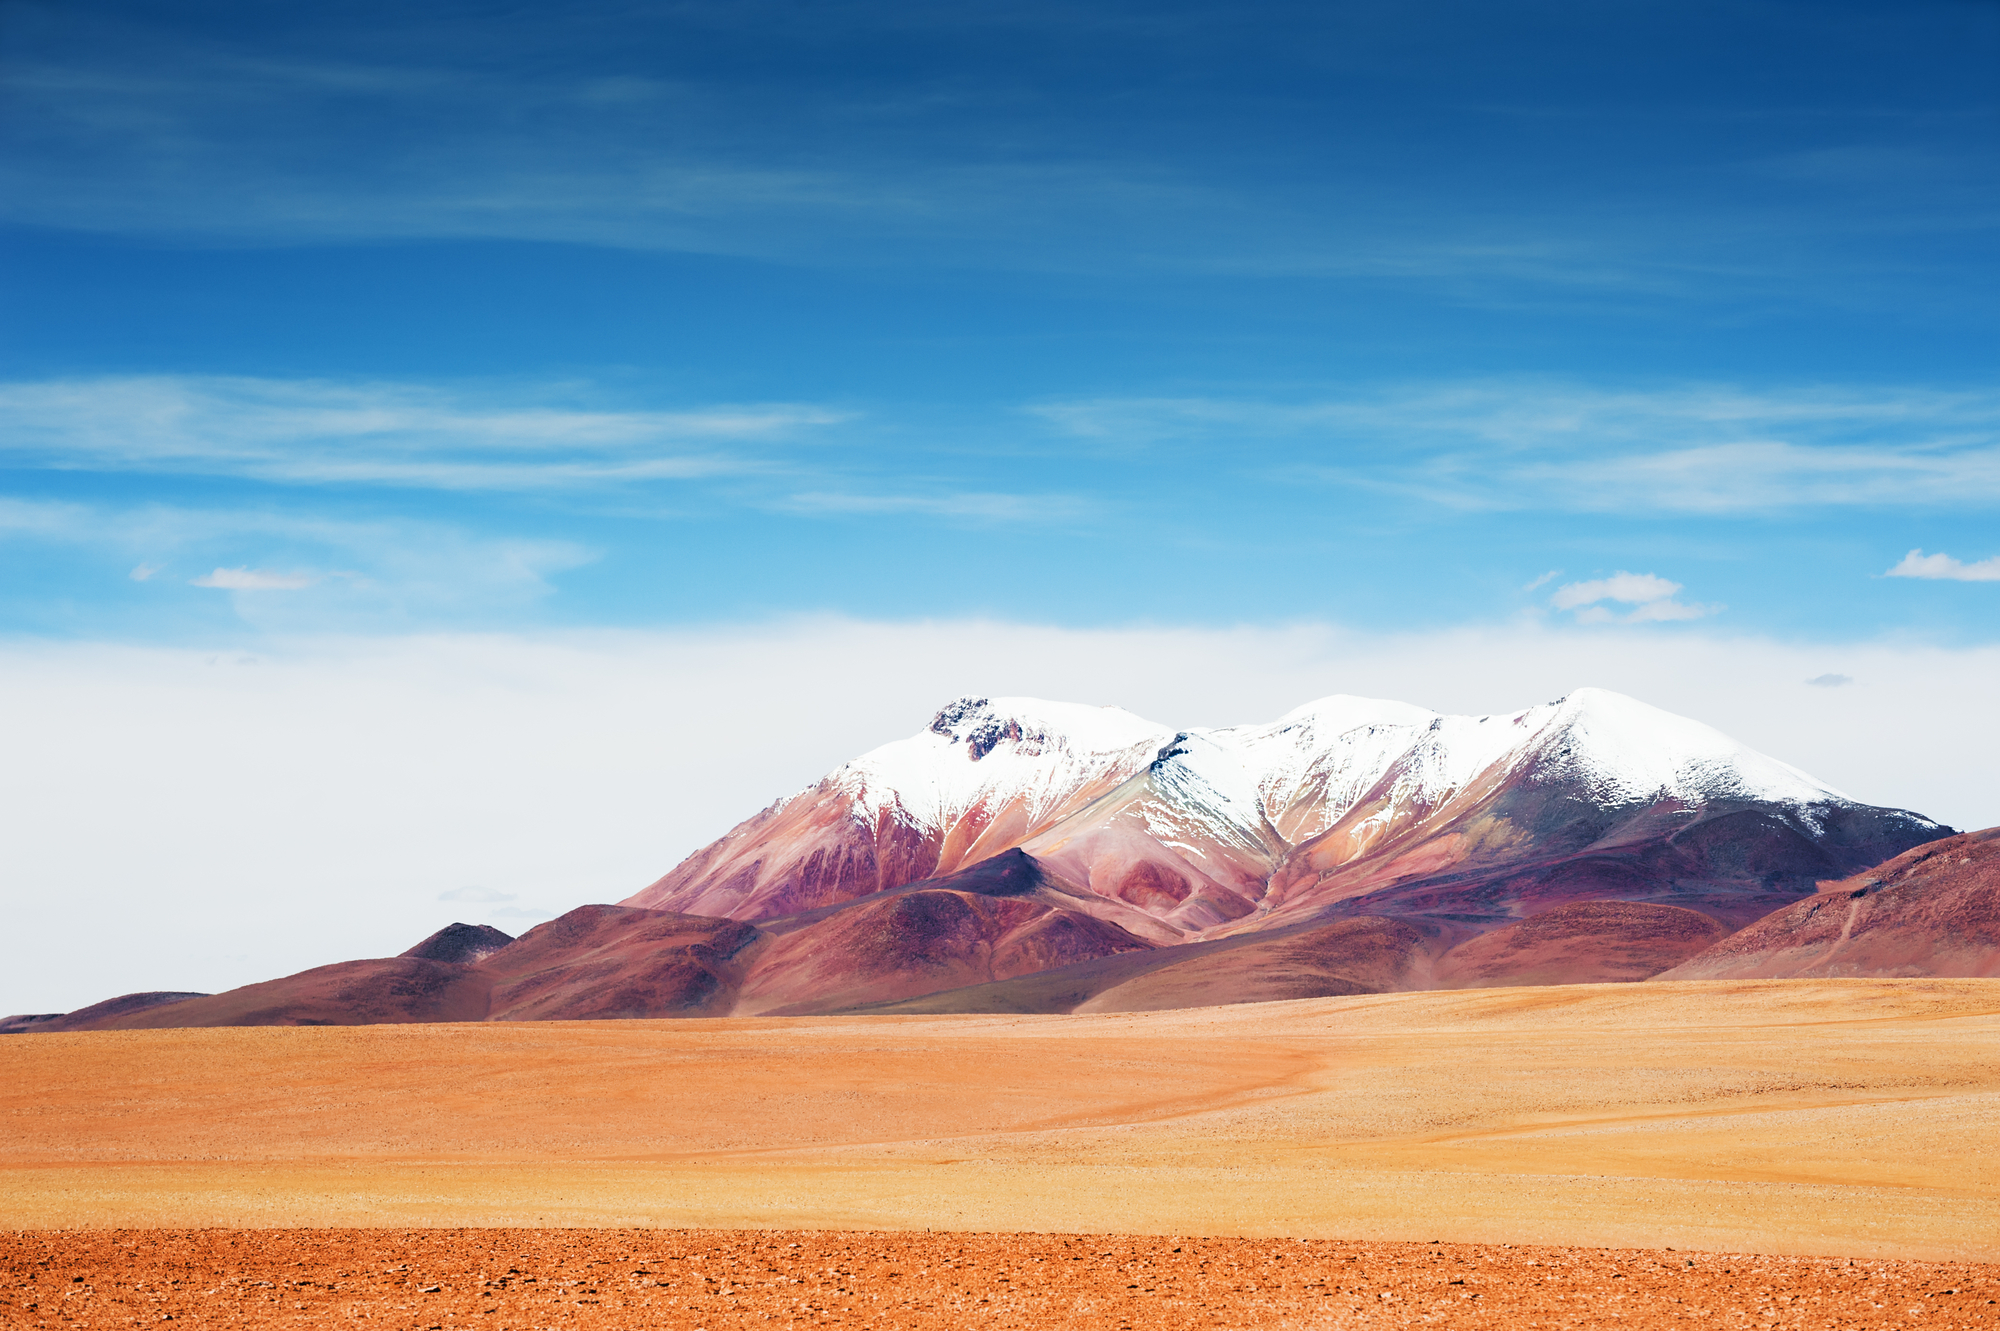 nature background wallpaper - desert and mountains on the plateau Altiplano, Bolivia